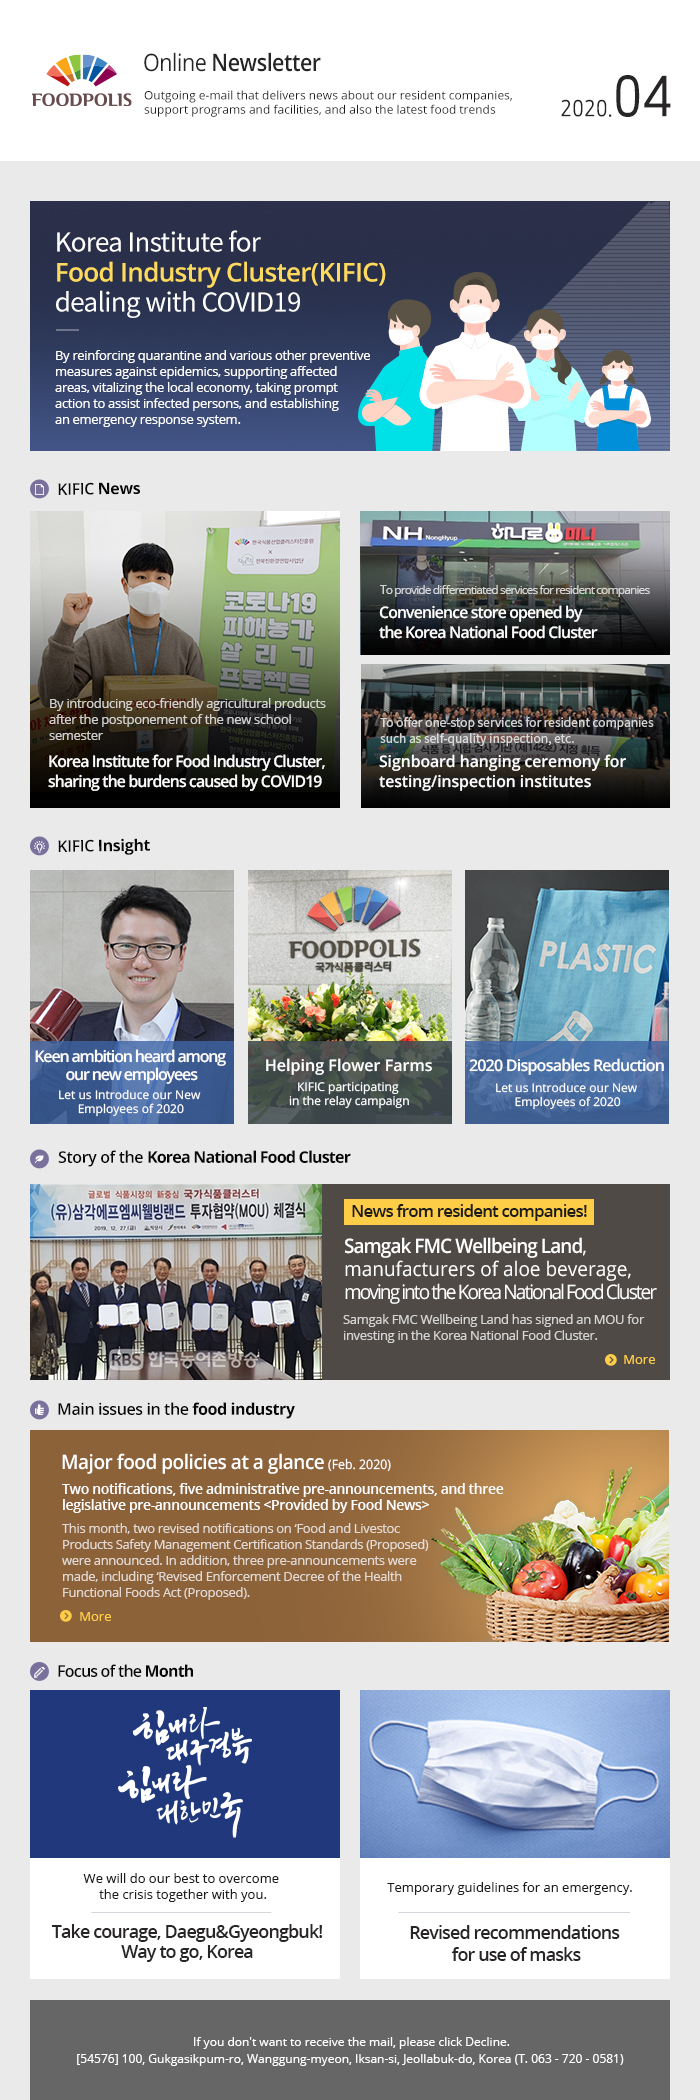 2020 April News Letter from the Korea National Food Cluster